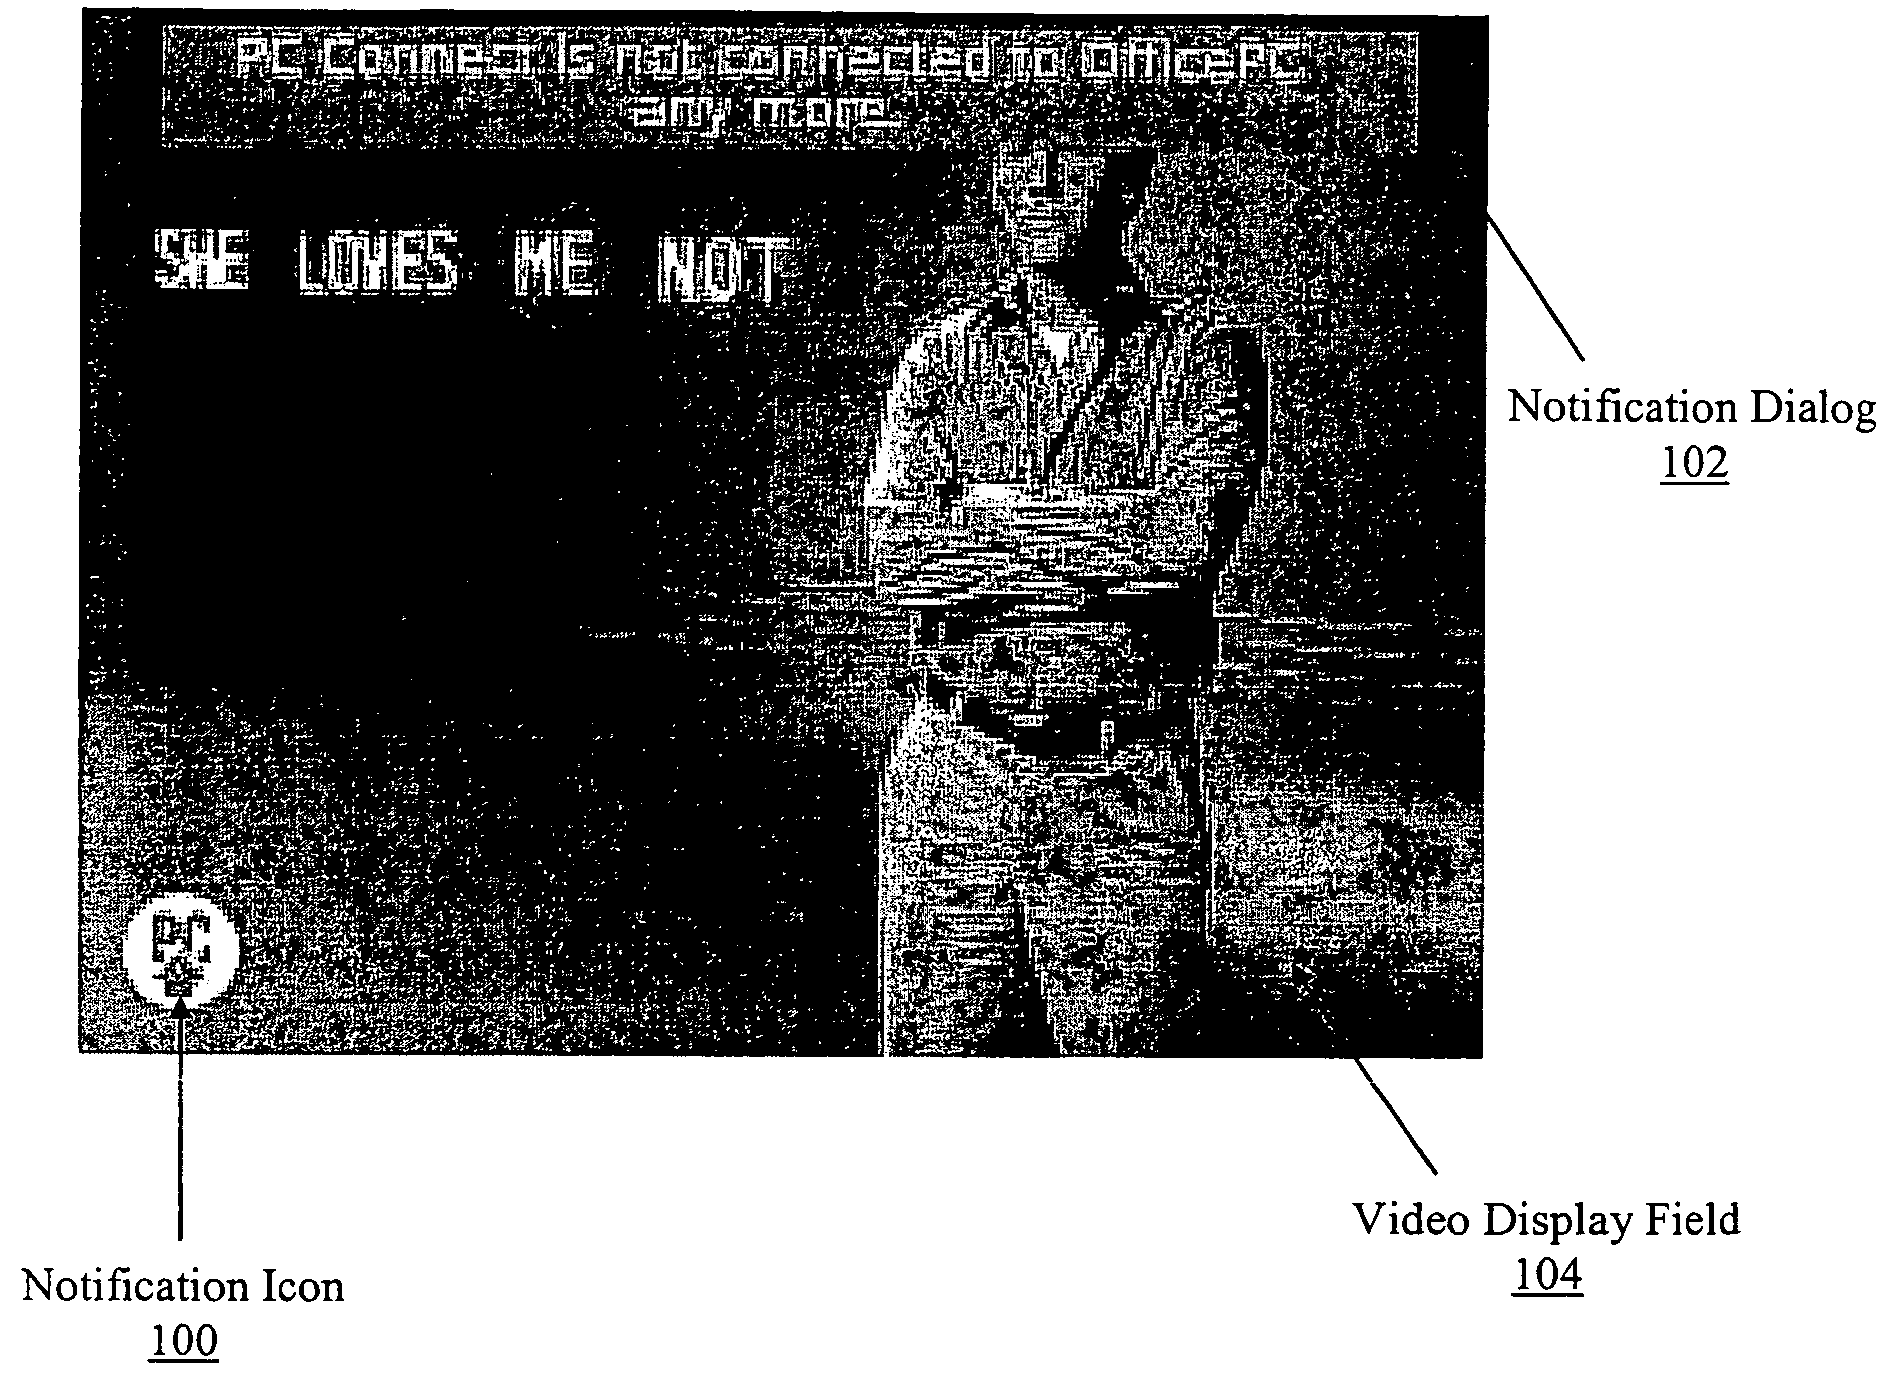 System and method for managing software alert messages on televisions